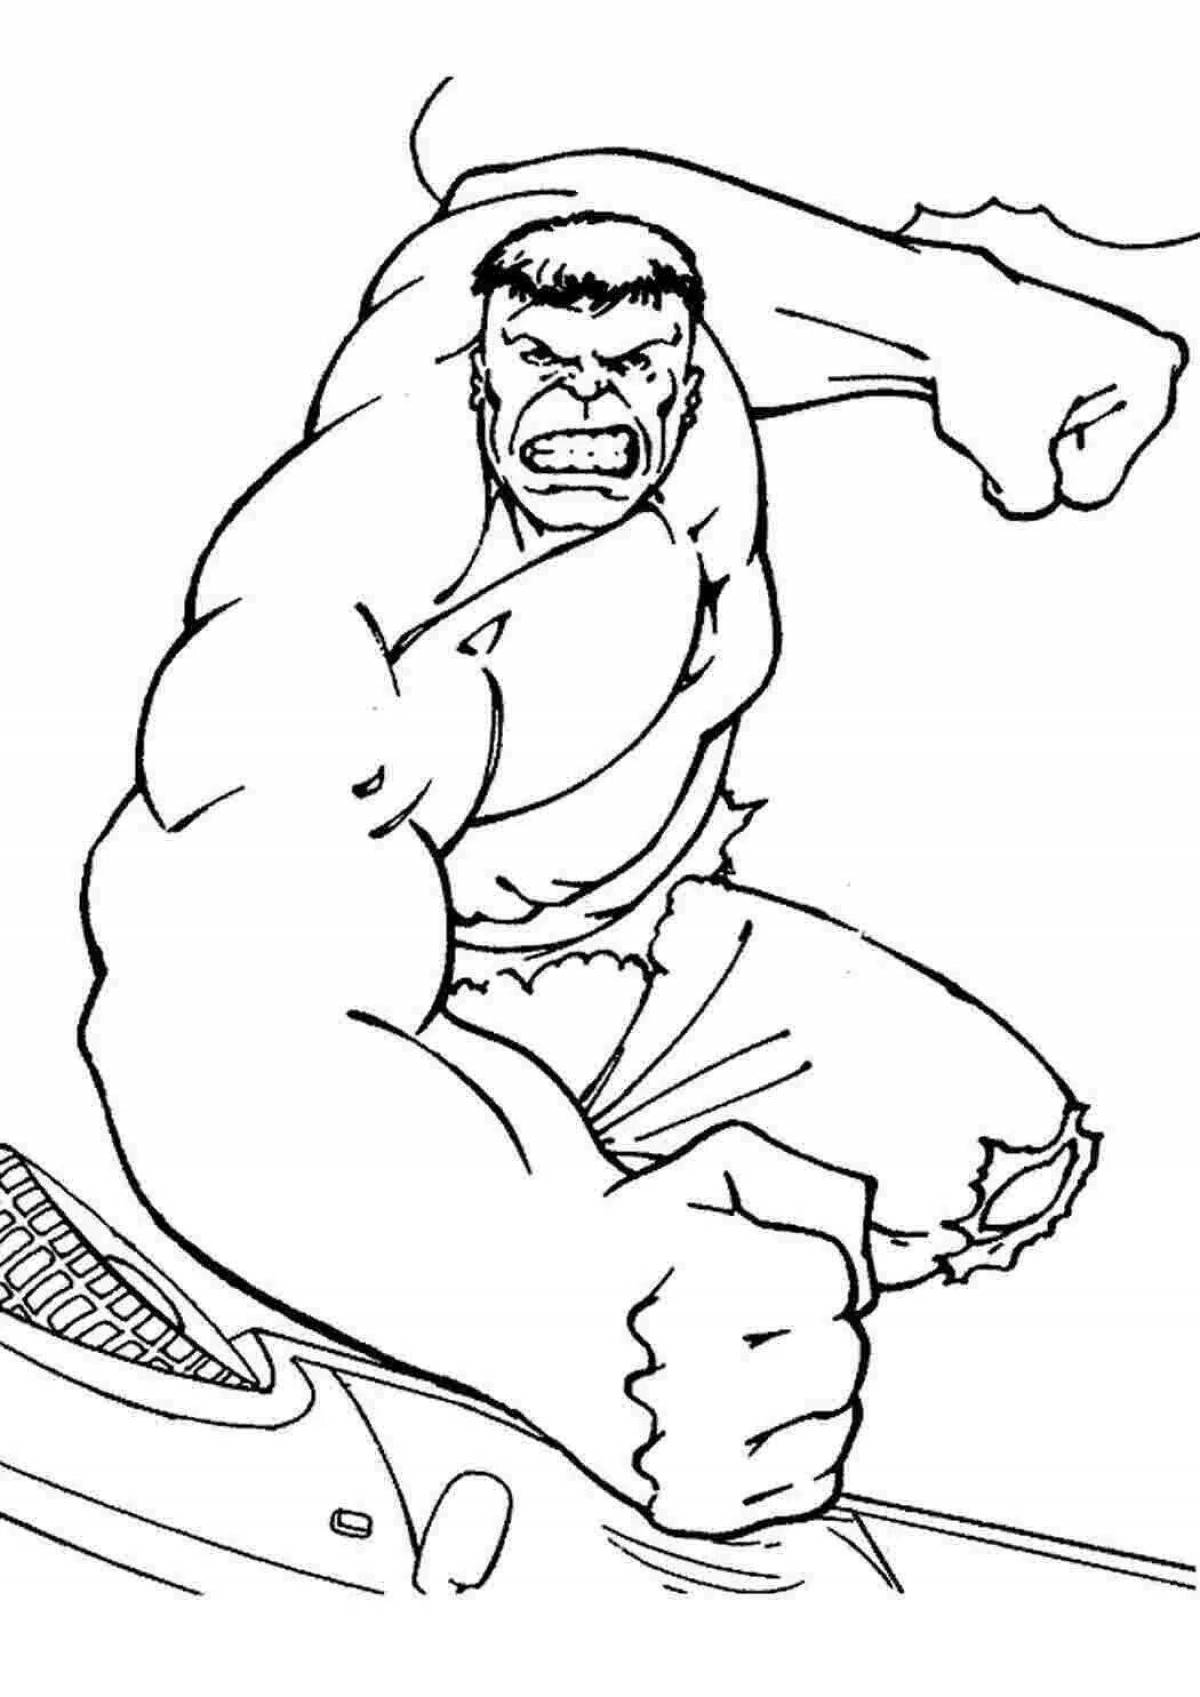 Lovely hulk coloring book for 5-6 year olds